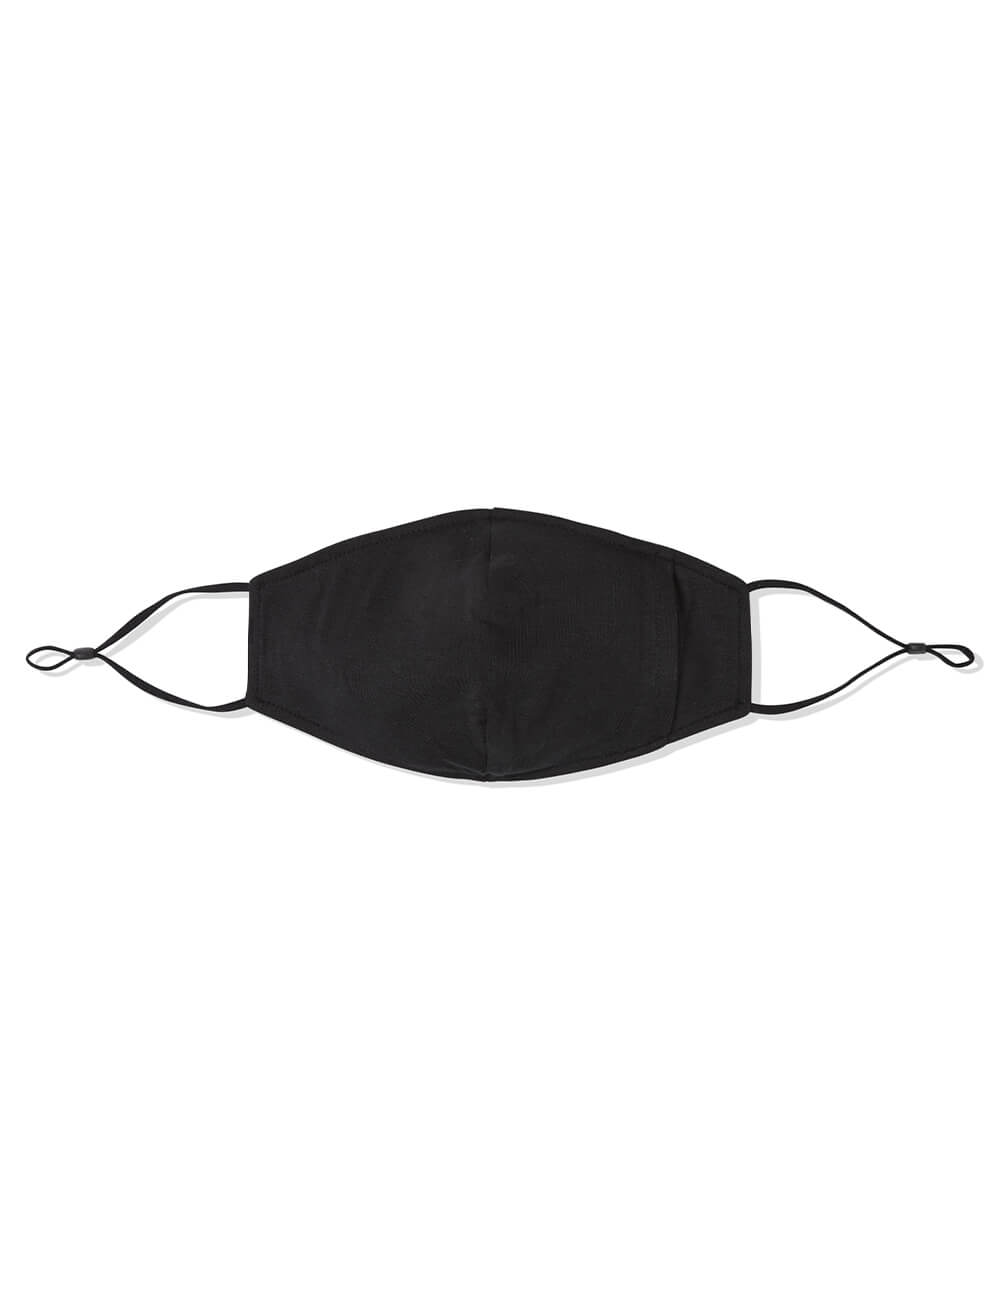 SoftTouch-Face-Mask-Black-Front.jpg